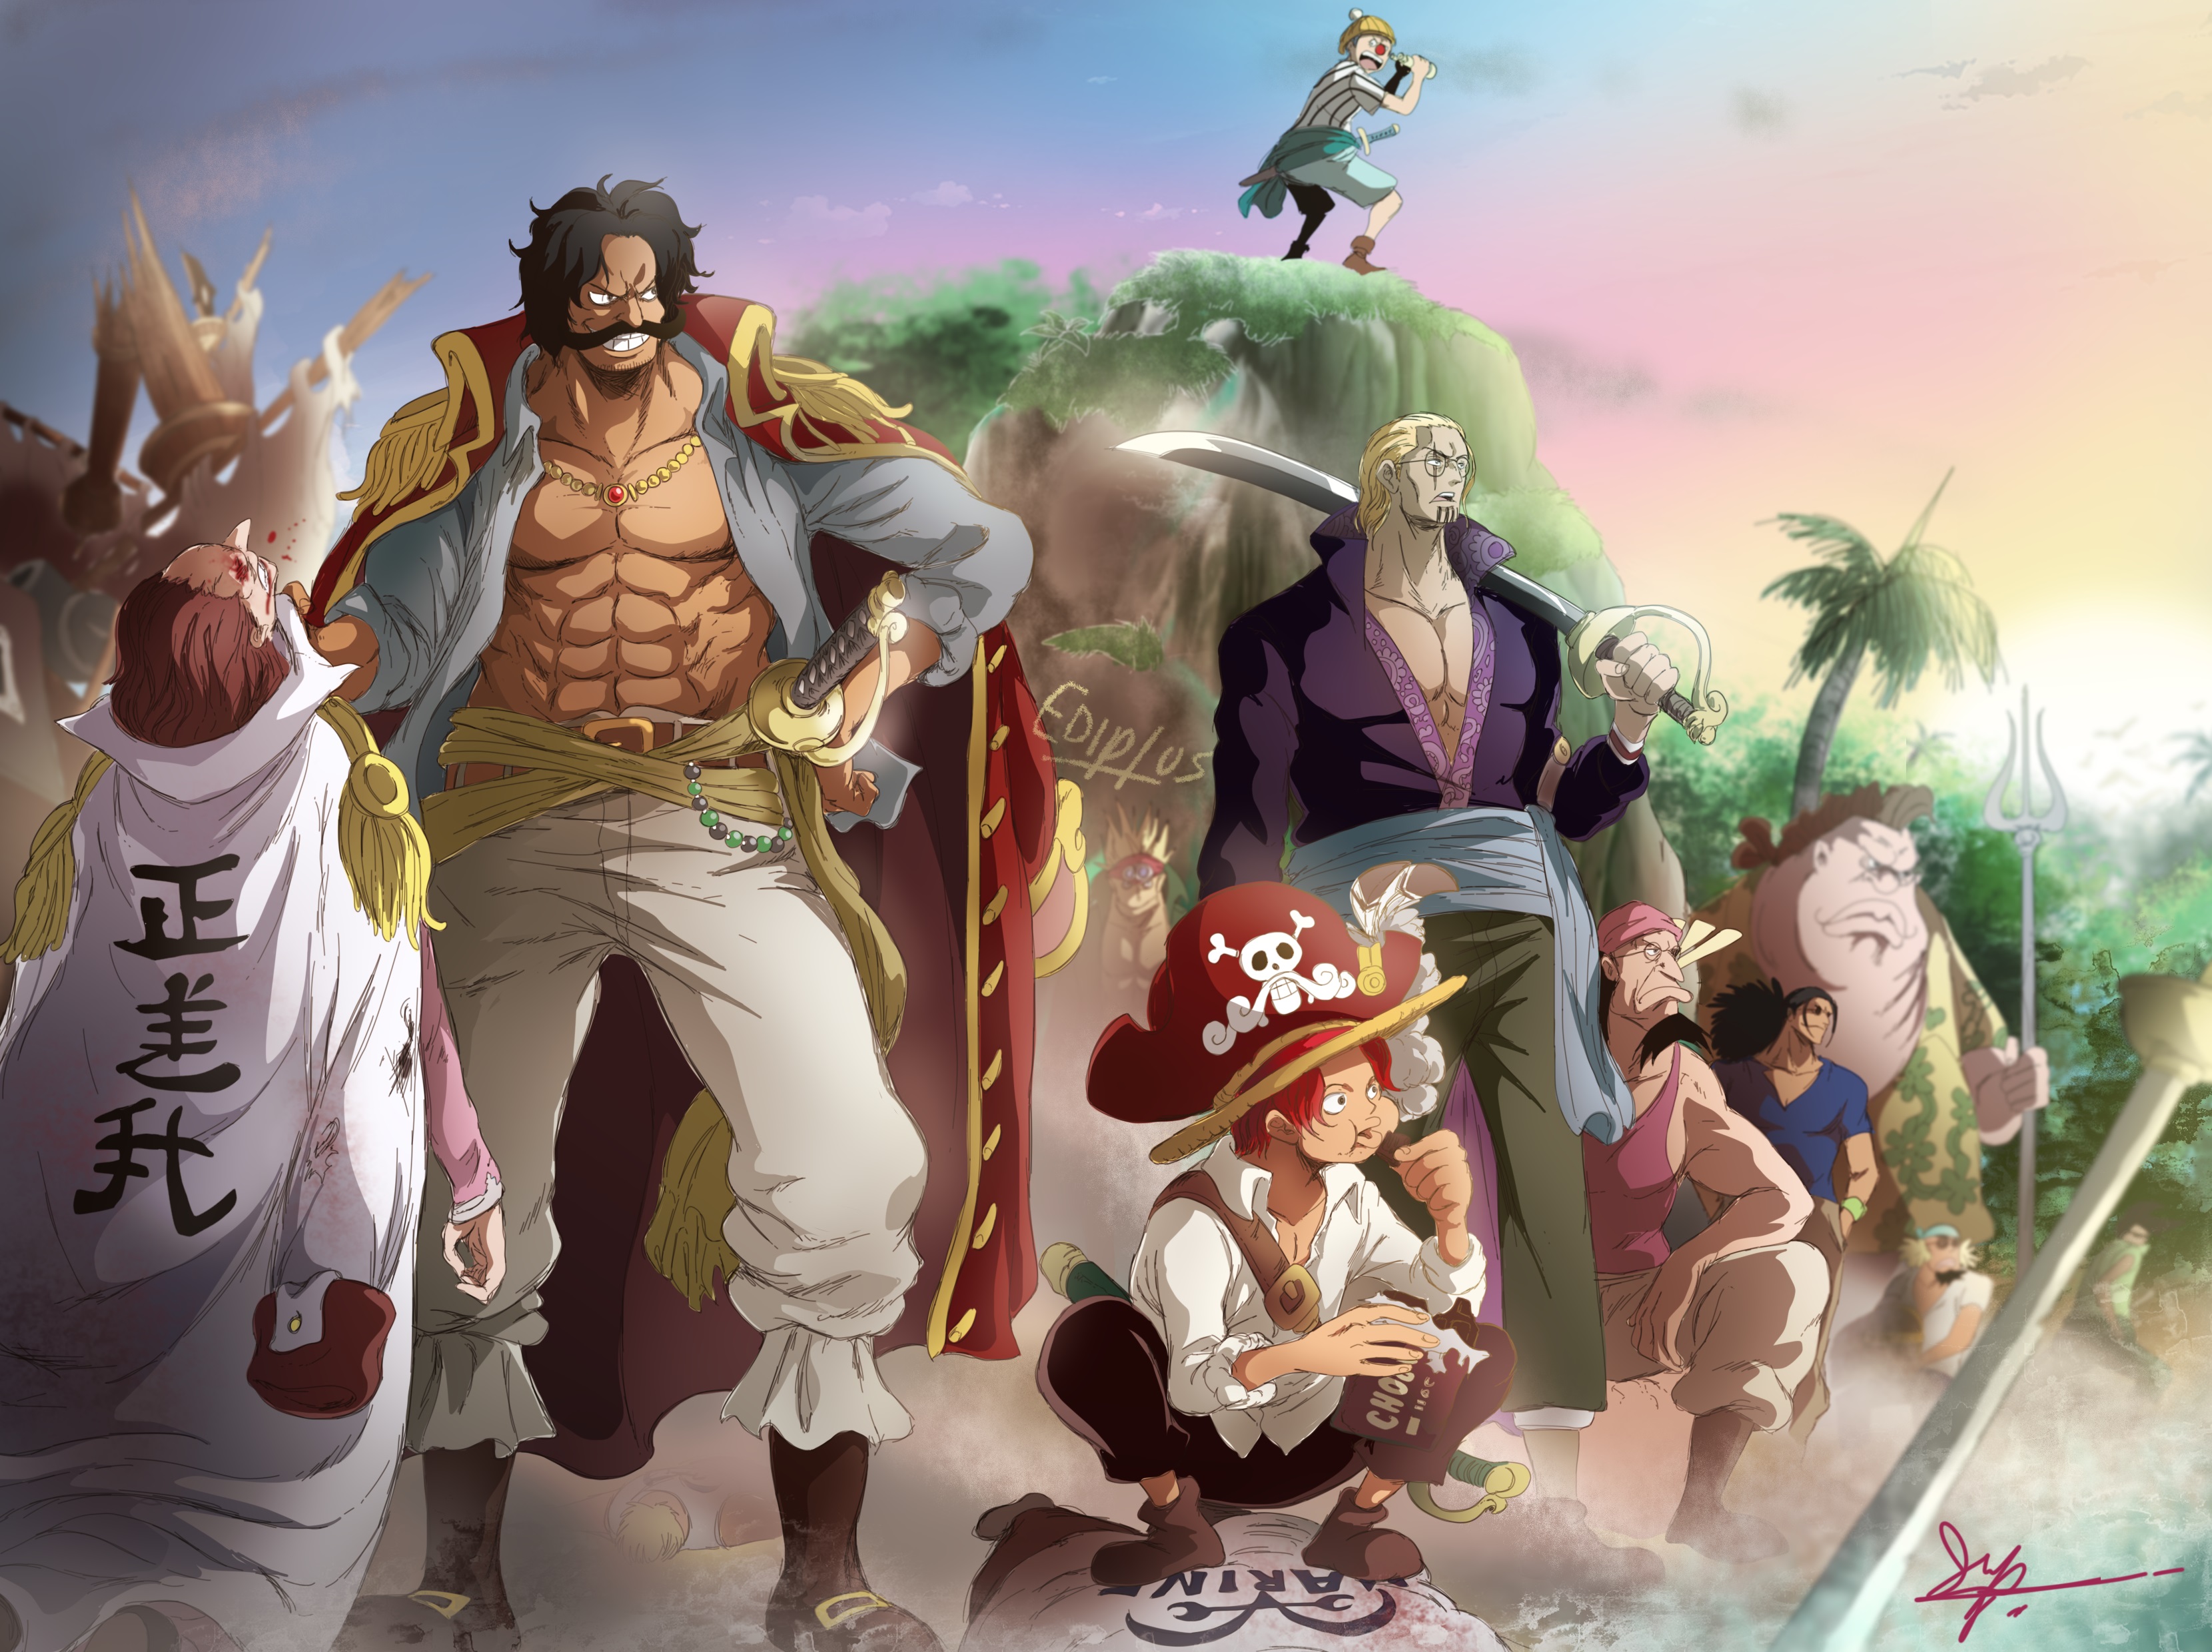 buggy (one piece), shanks (one piece), gol d roger, anime, one piece, crocus (one piece), scopper gaban, seagull (one piece), silvers rayleigh